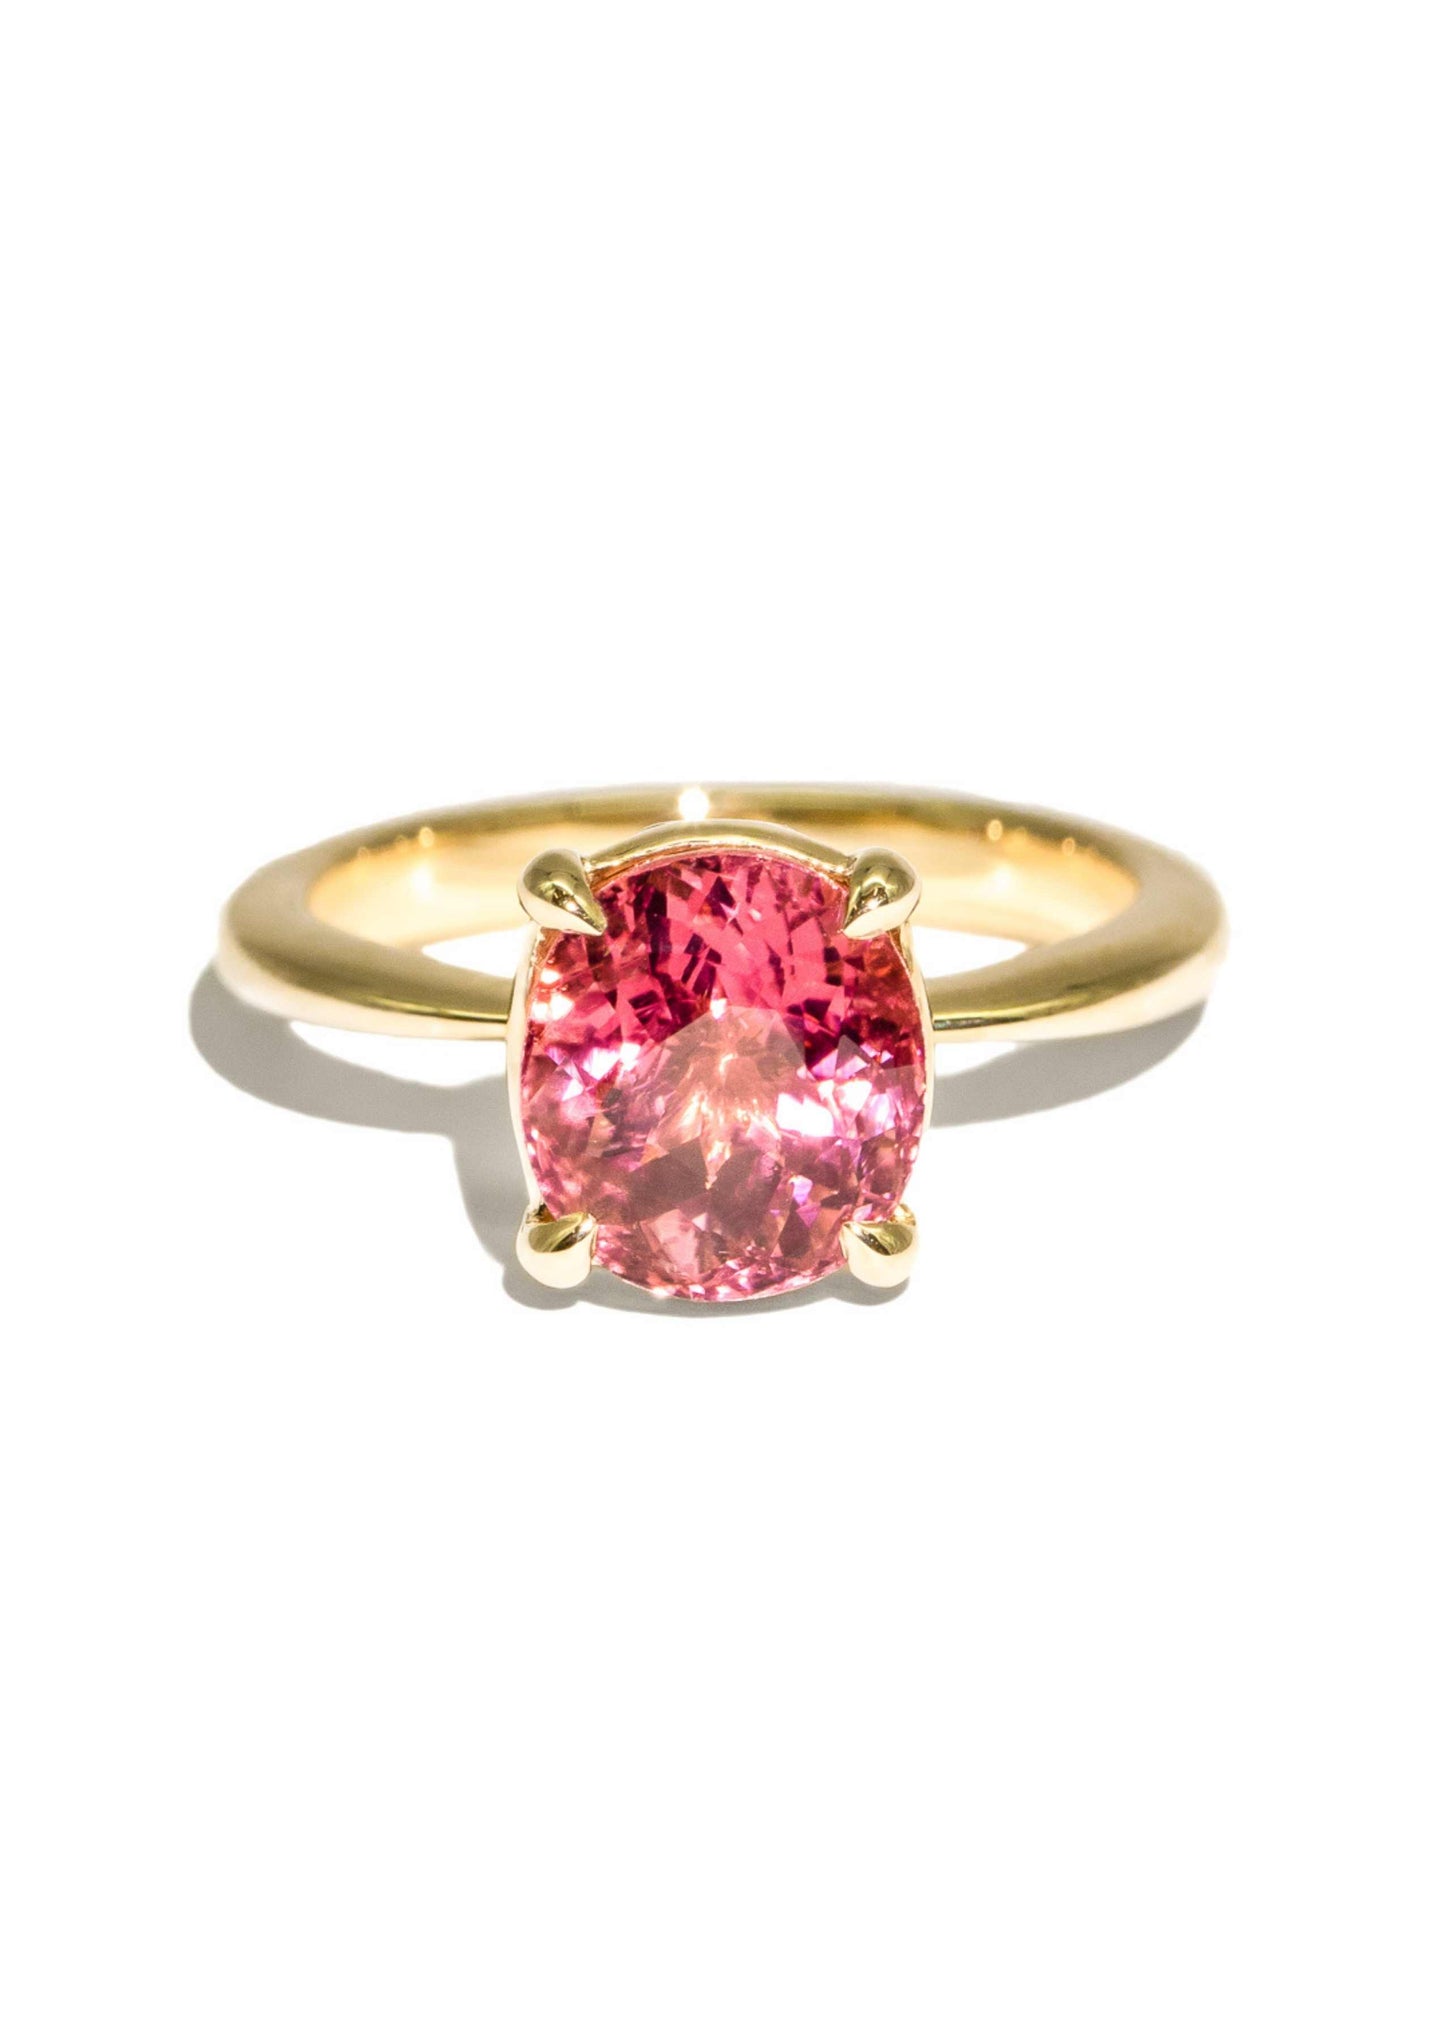 The June Ring with 3.44ct Tourmaline